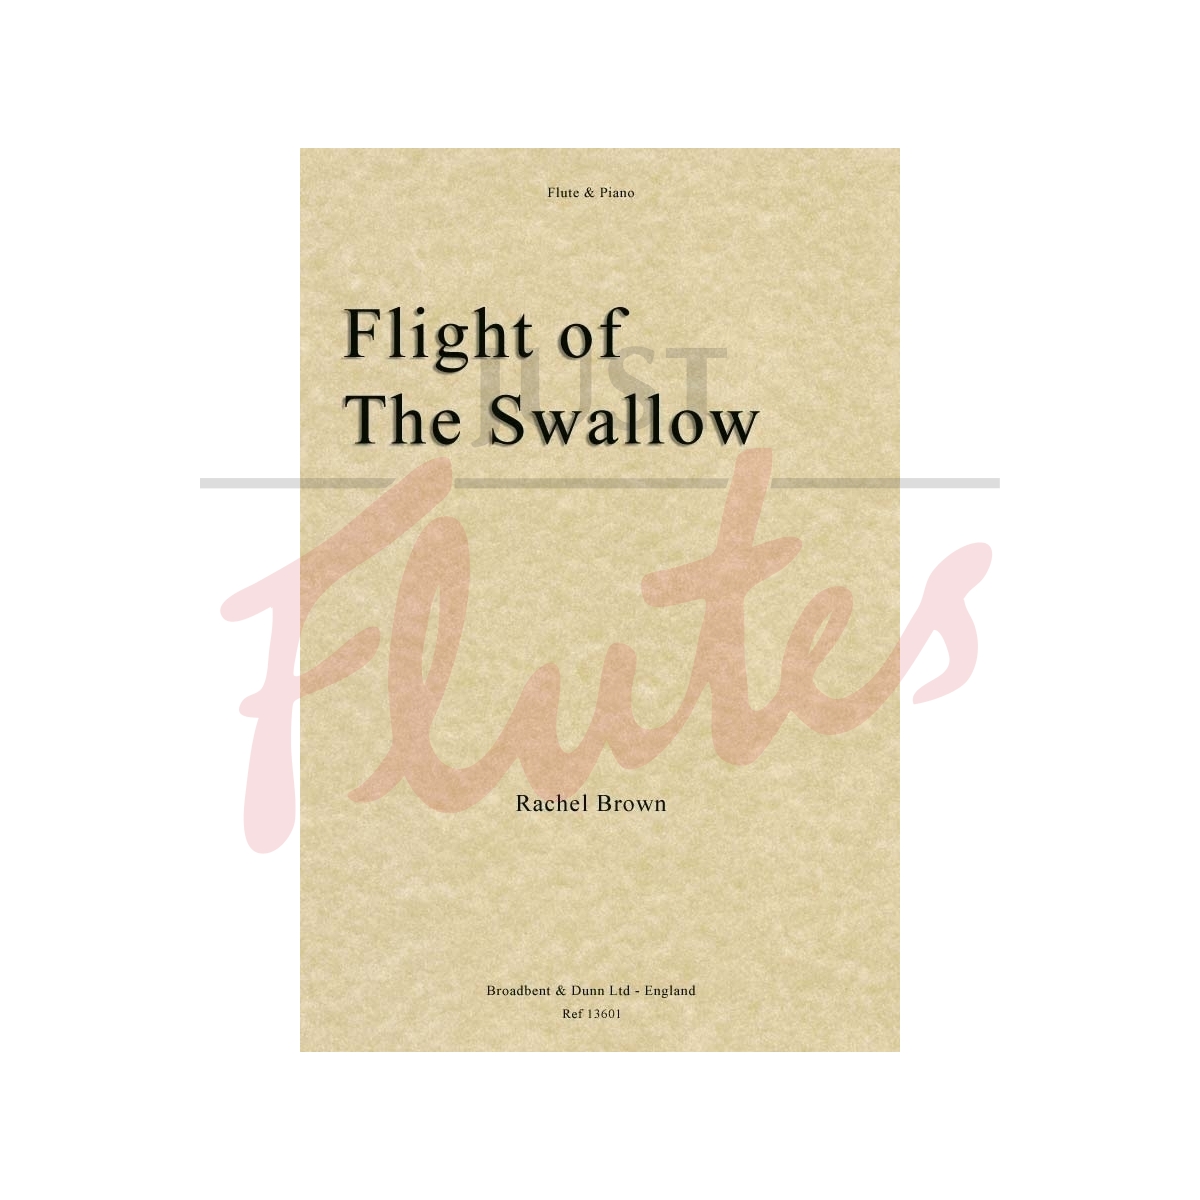 Flight of the Swallow